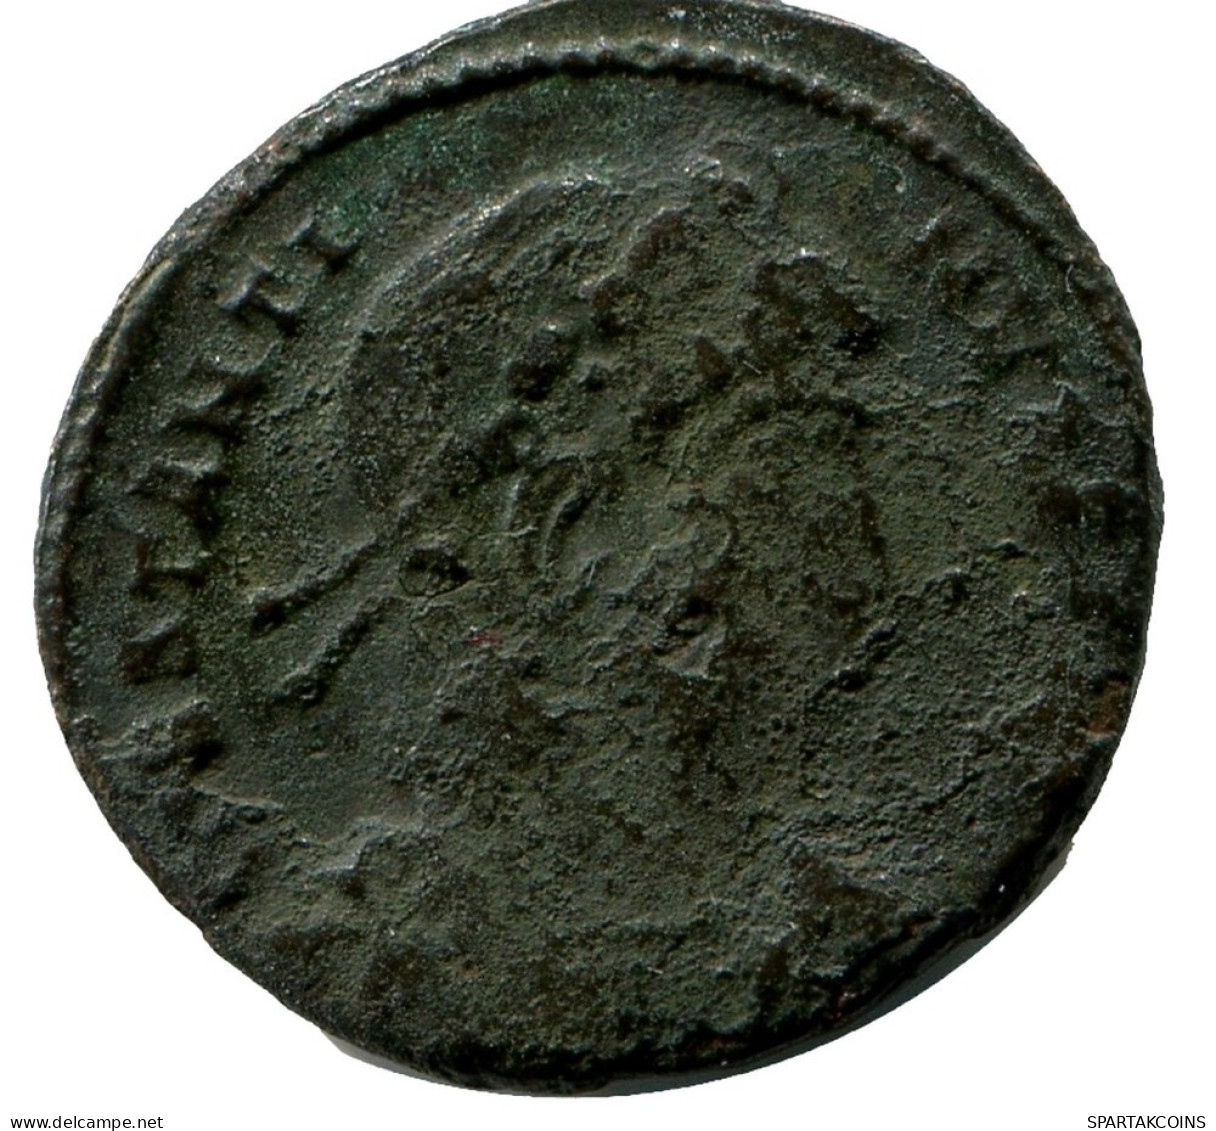 CONSTANTINE I MINTED IN CONSTANTINOPLE FOUND IN IHNASYAH HOARD #ANC10813.14.F.A - L'Empire Chrétien (307 à 363)